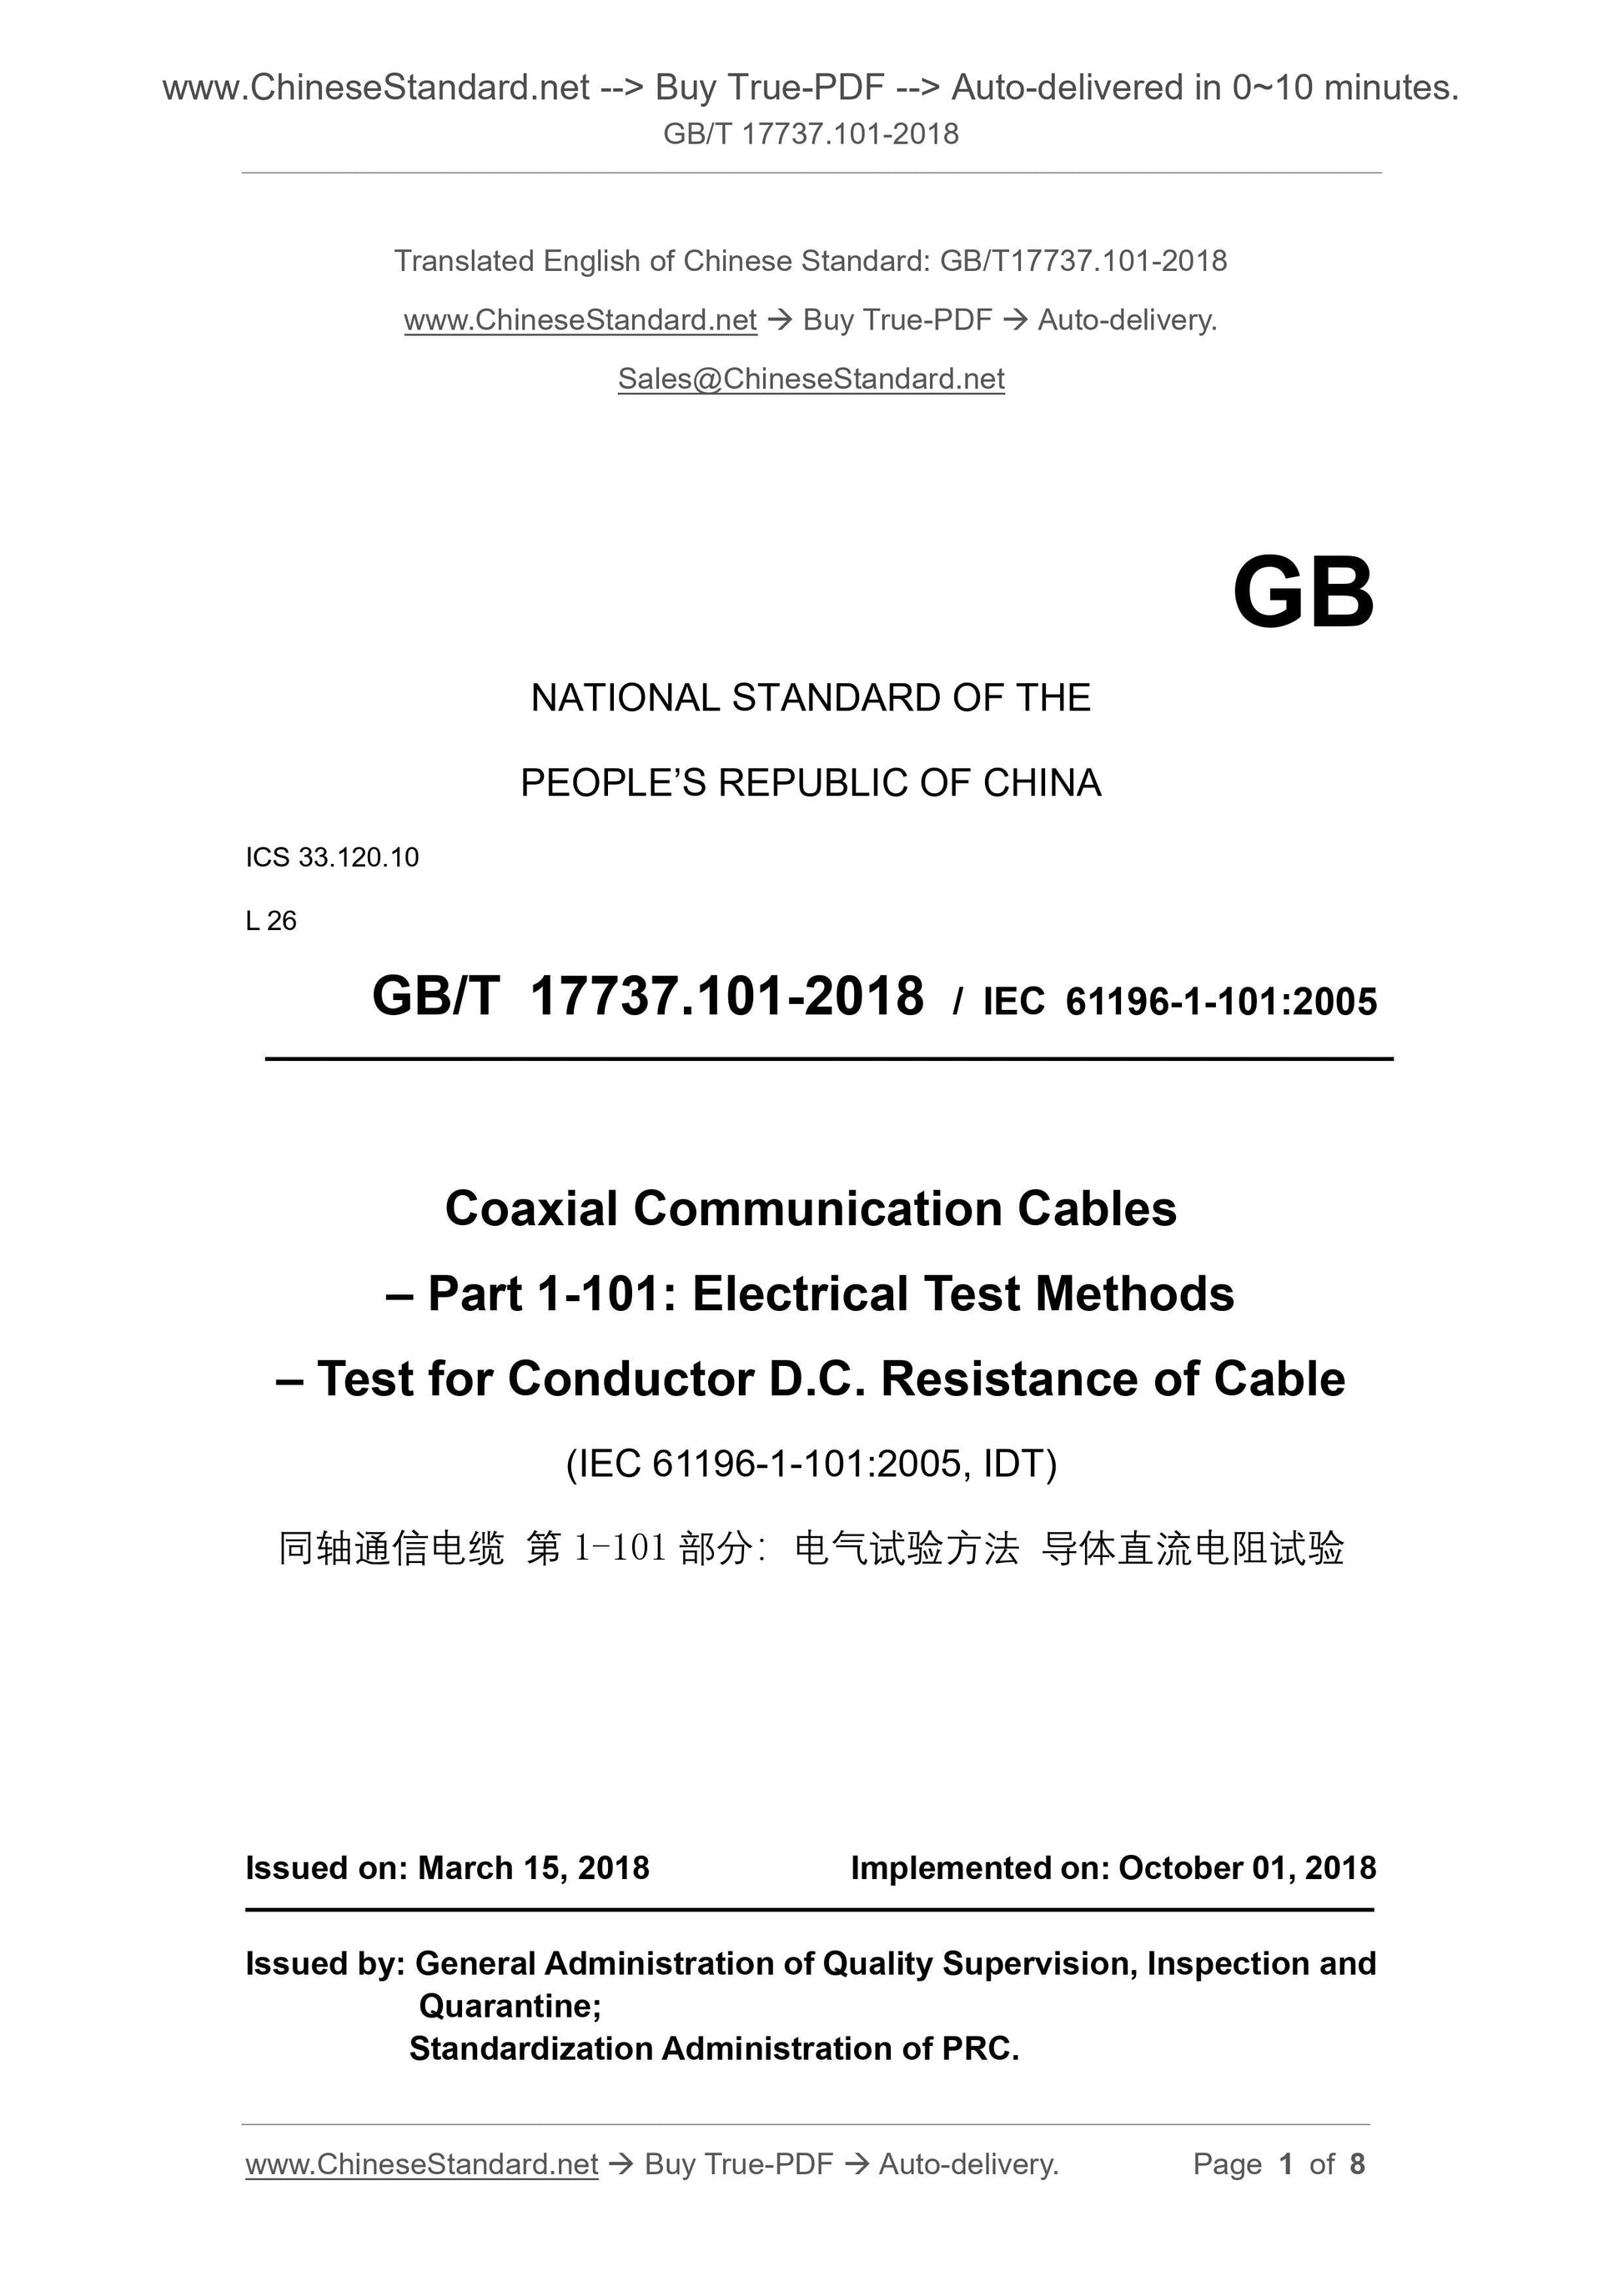 GB/T 17737.101-2018 Page 1